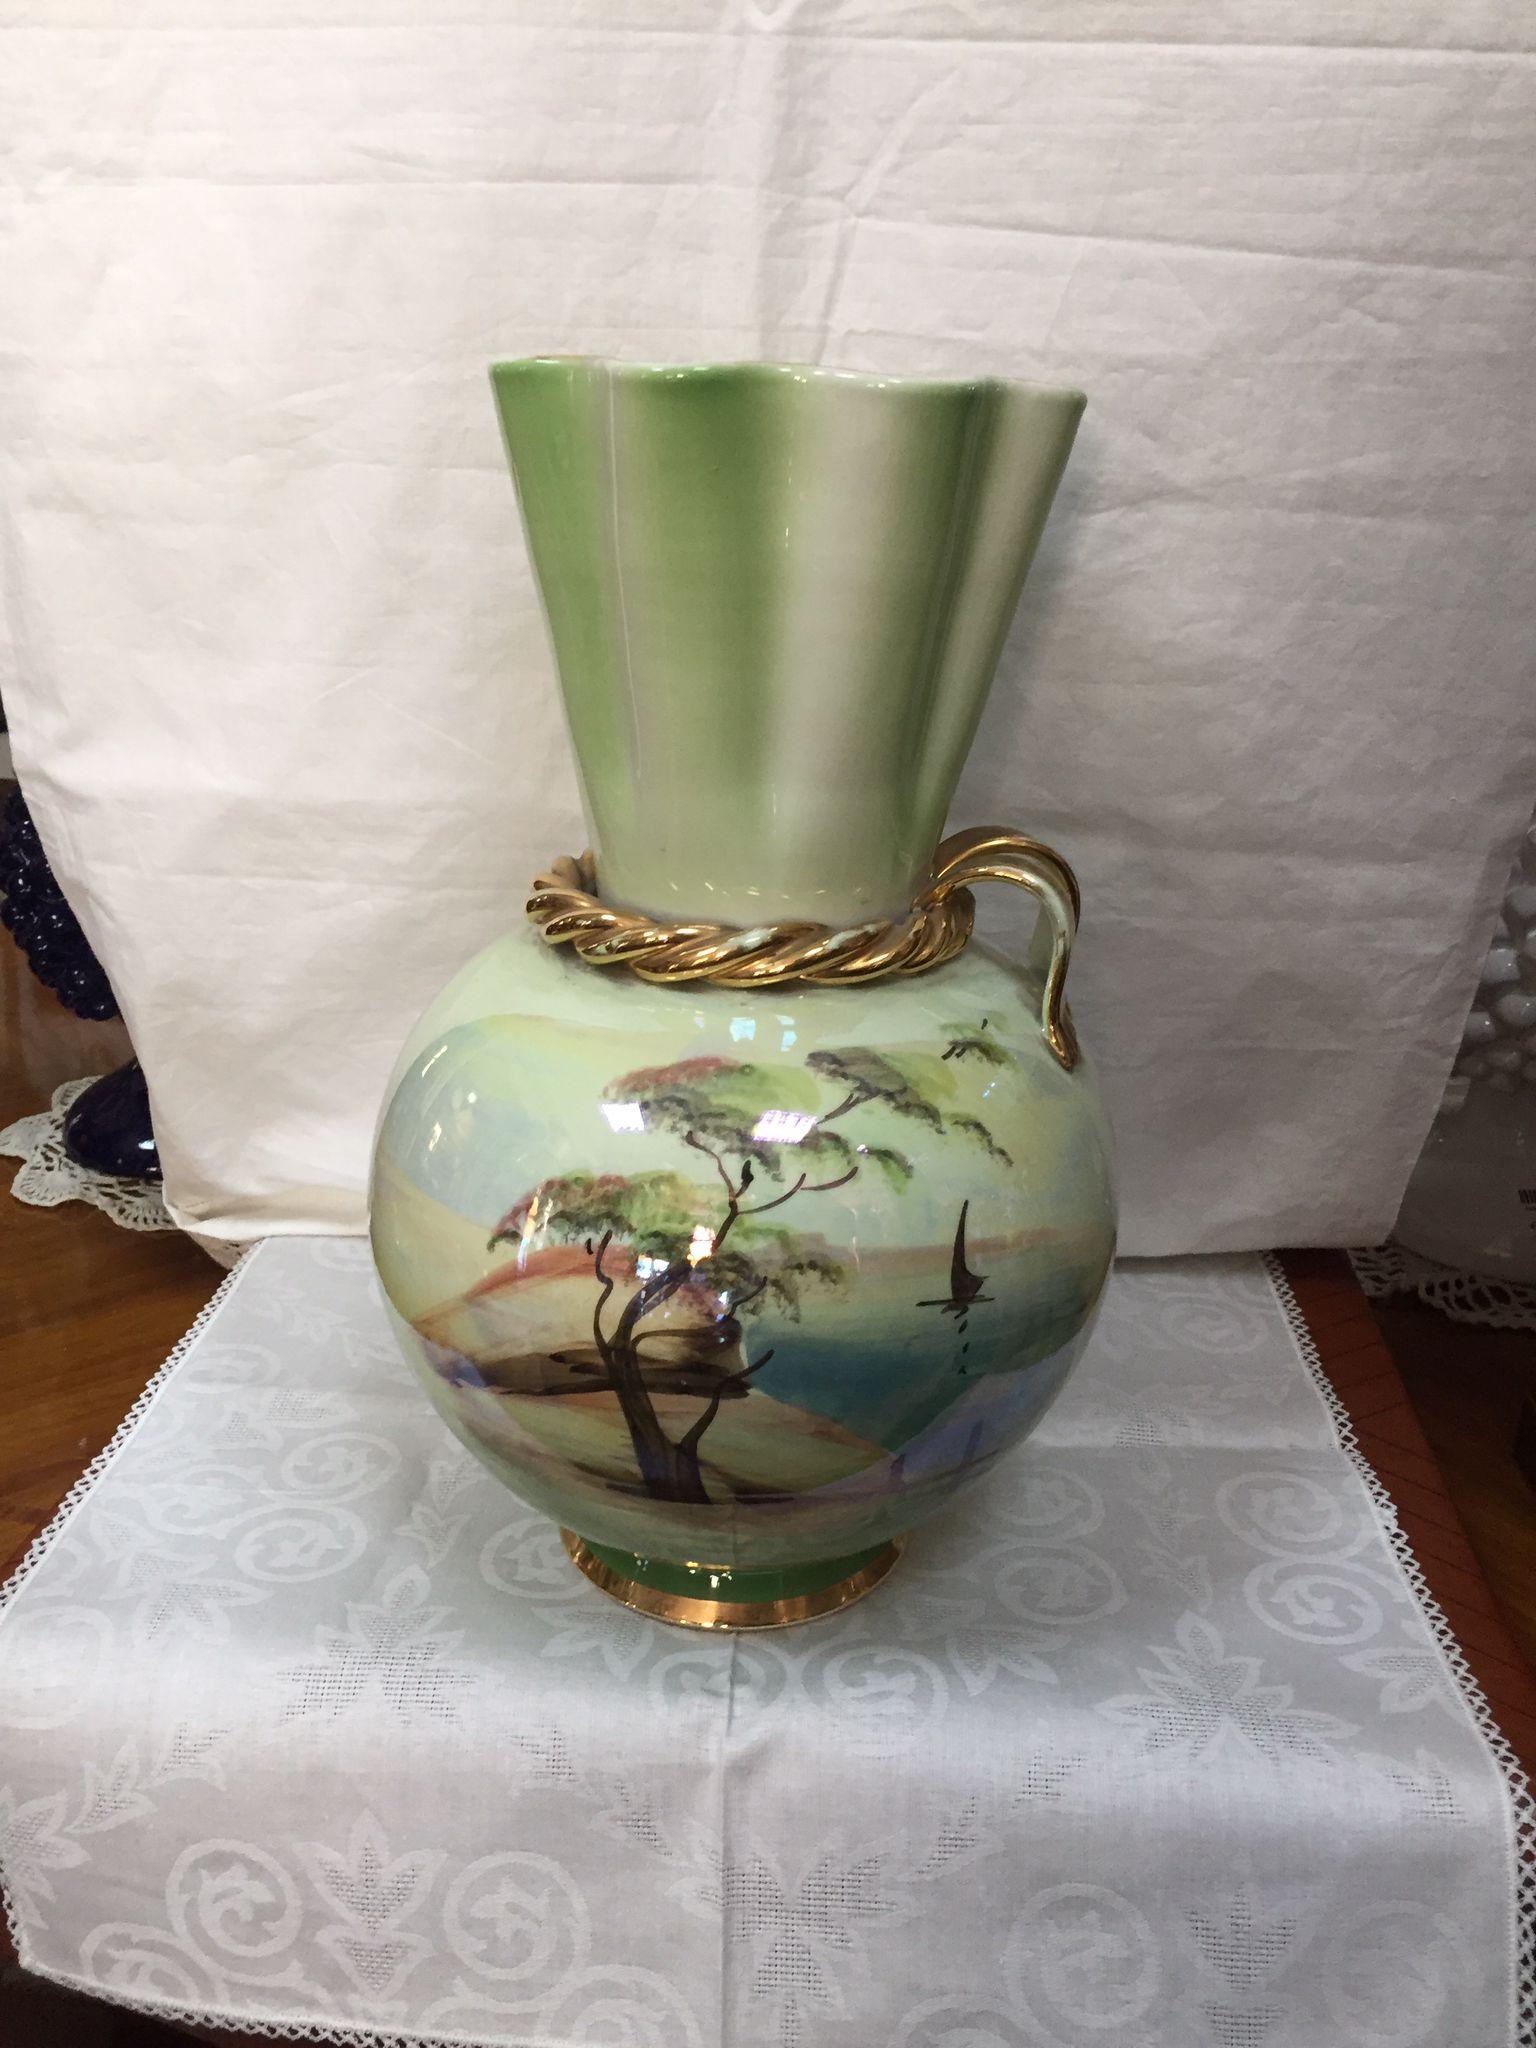 Amazing Decorative ceramic vase decorated with typical elements of the Italian Mid Century Modern. Italy 2000.
Decorative ceramic vase decorated on both sides with Country landscapes.
Excellent Conditions
